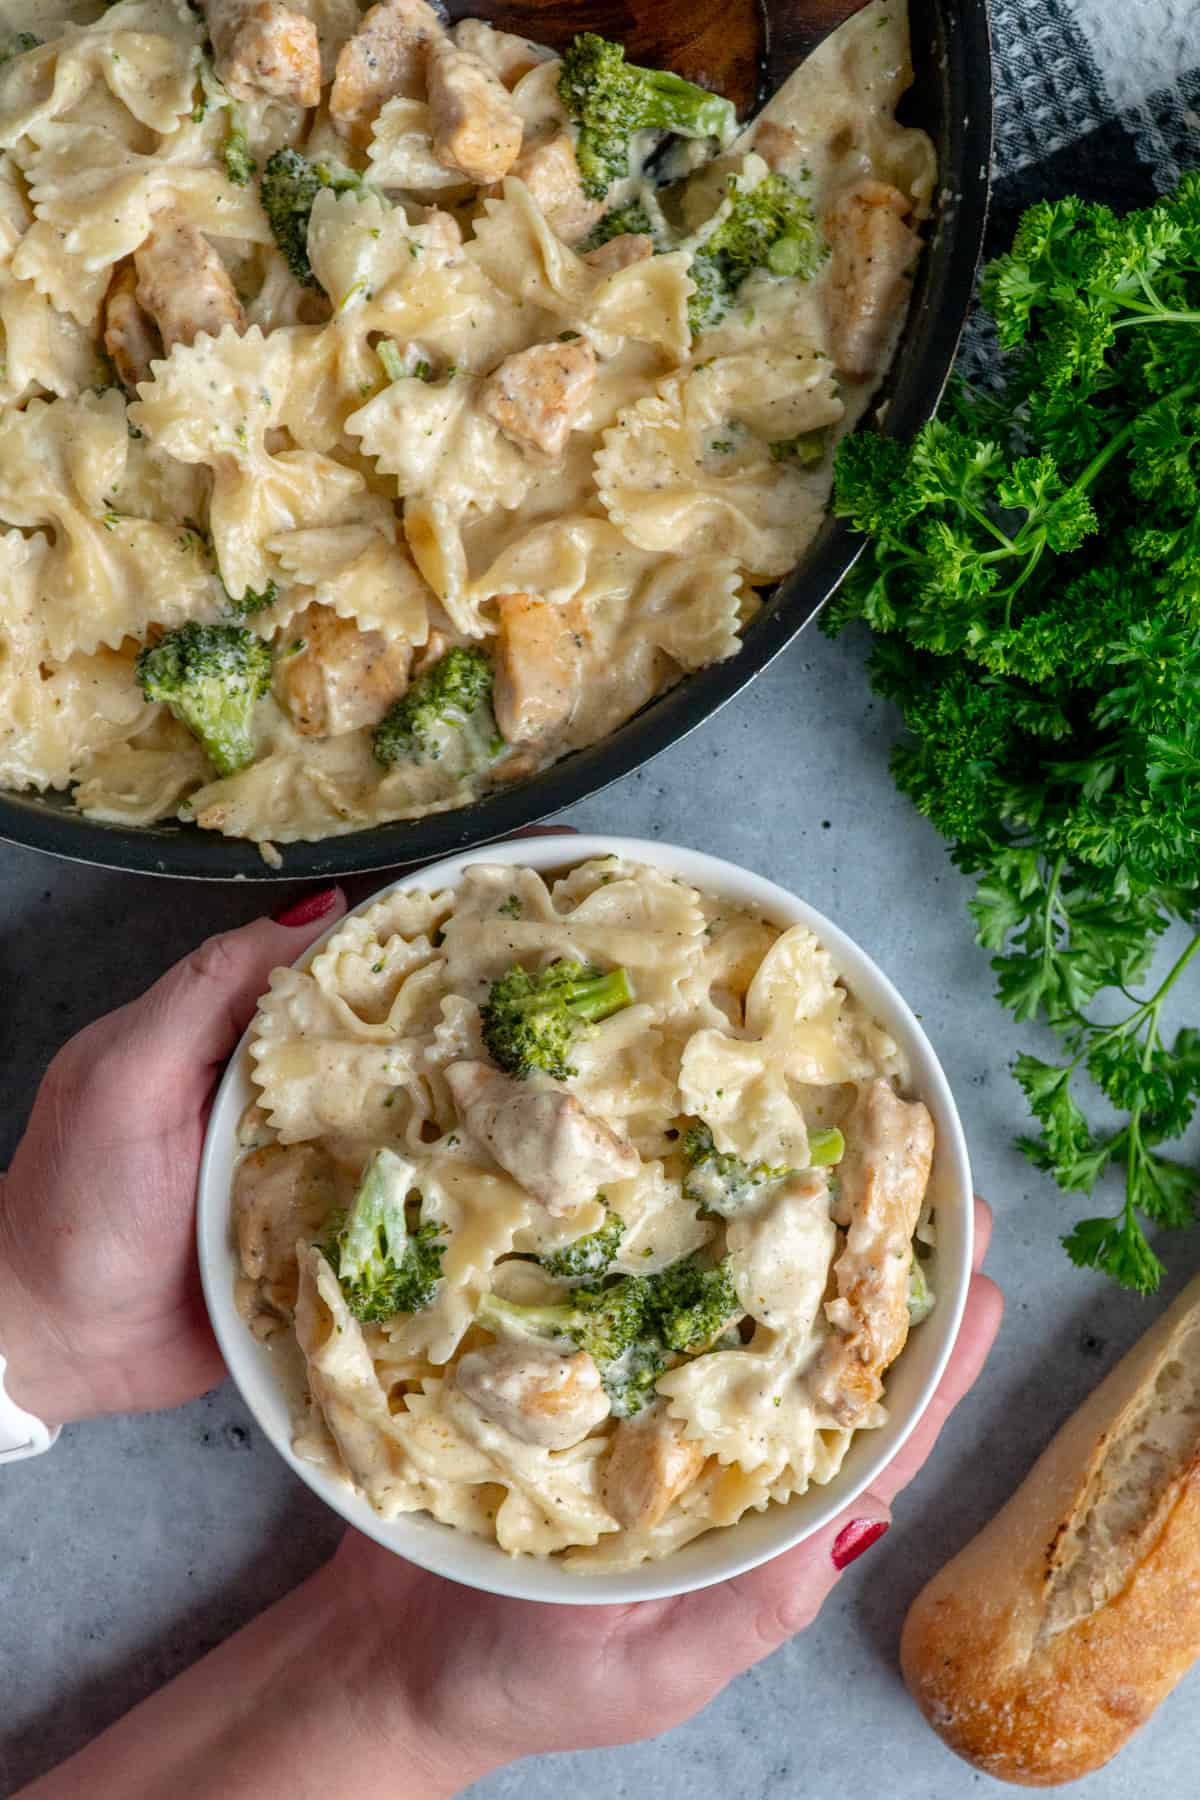 Hands holding a bowl of chicken broccoli Alfredo.